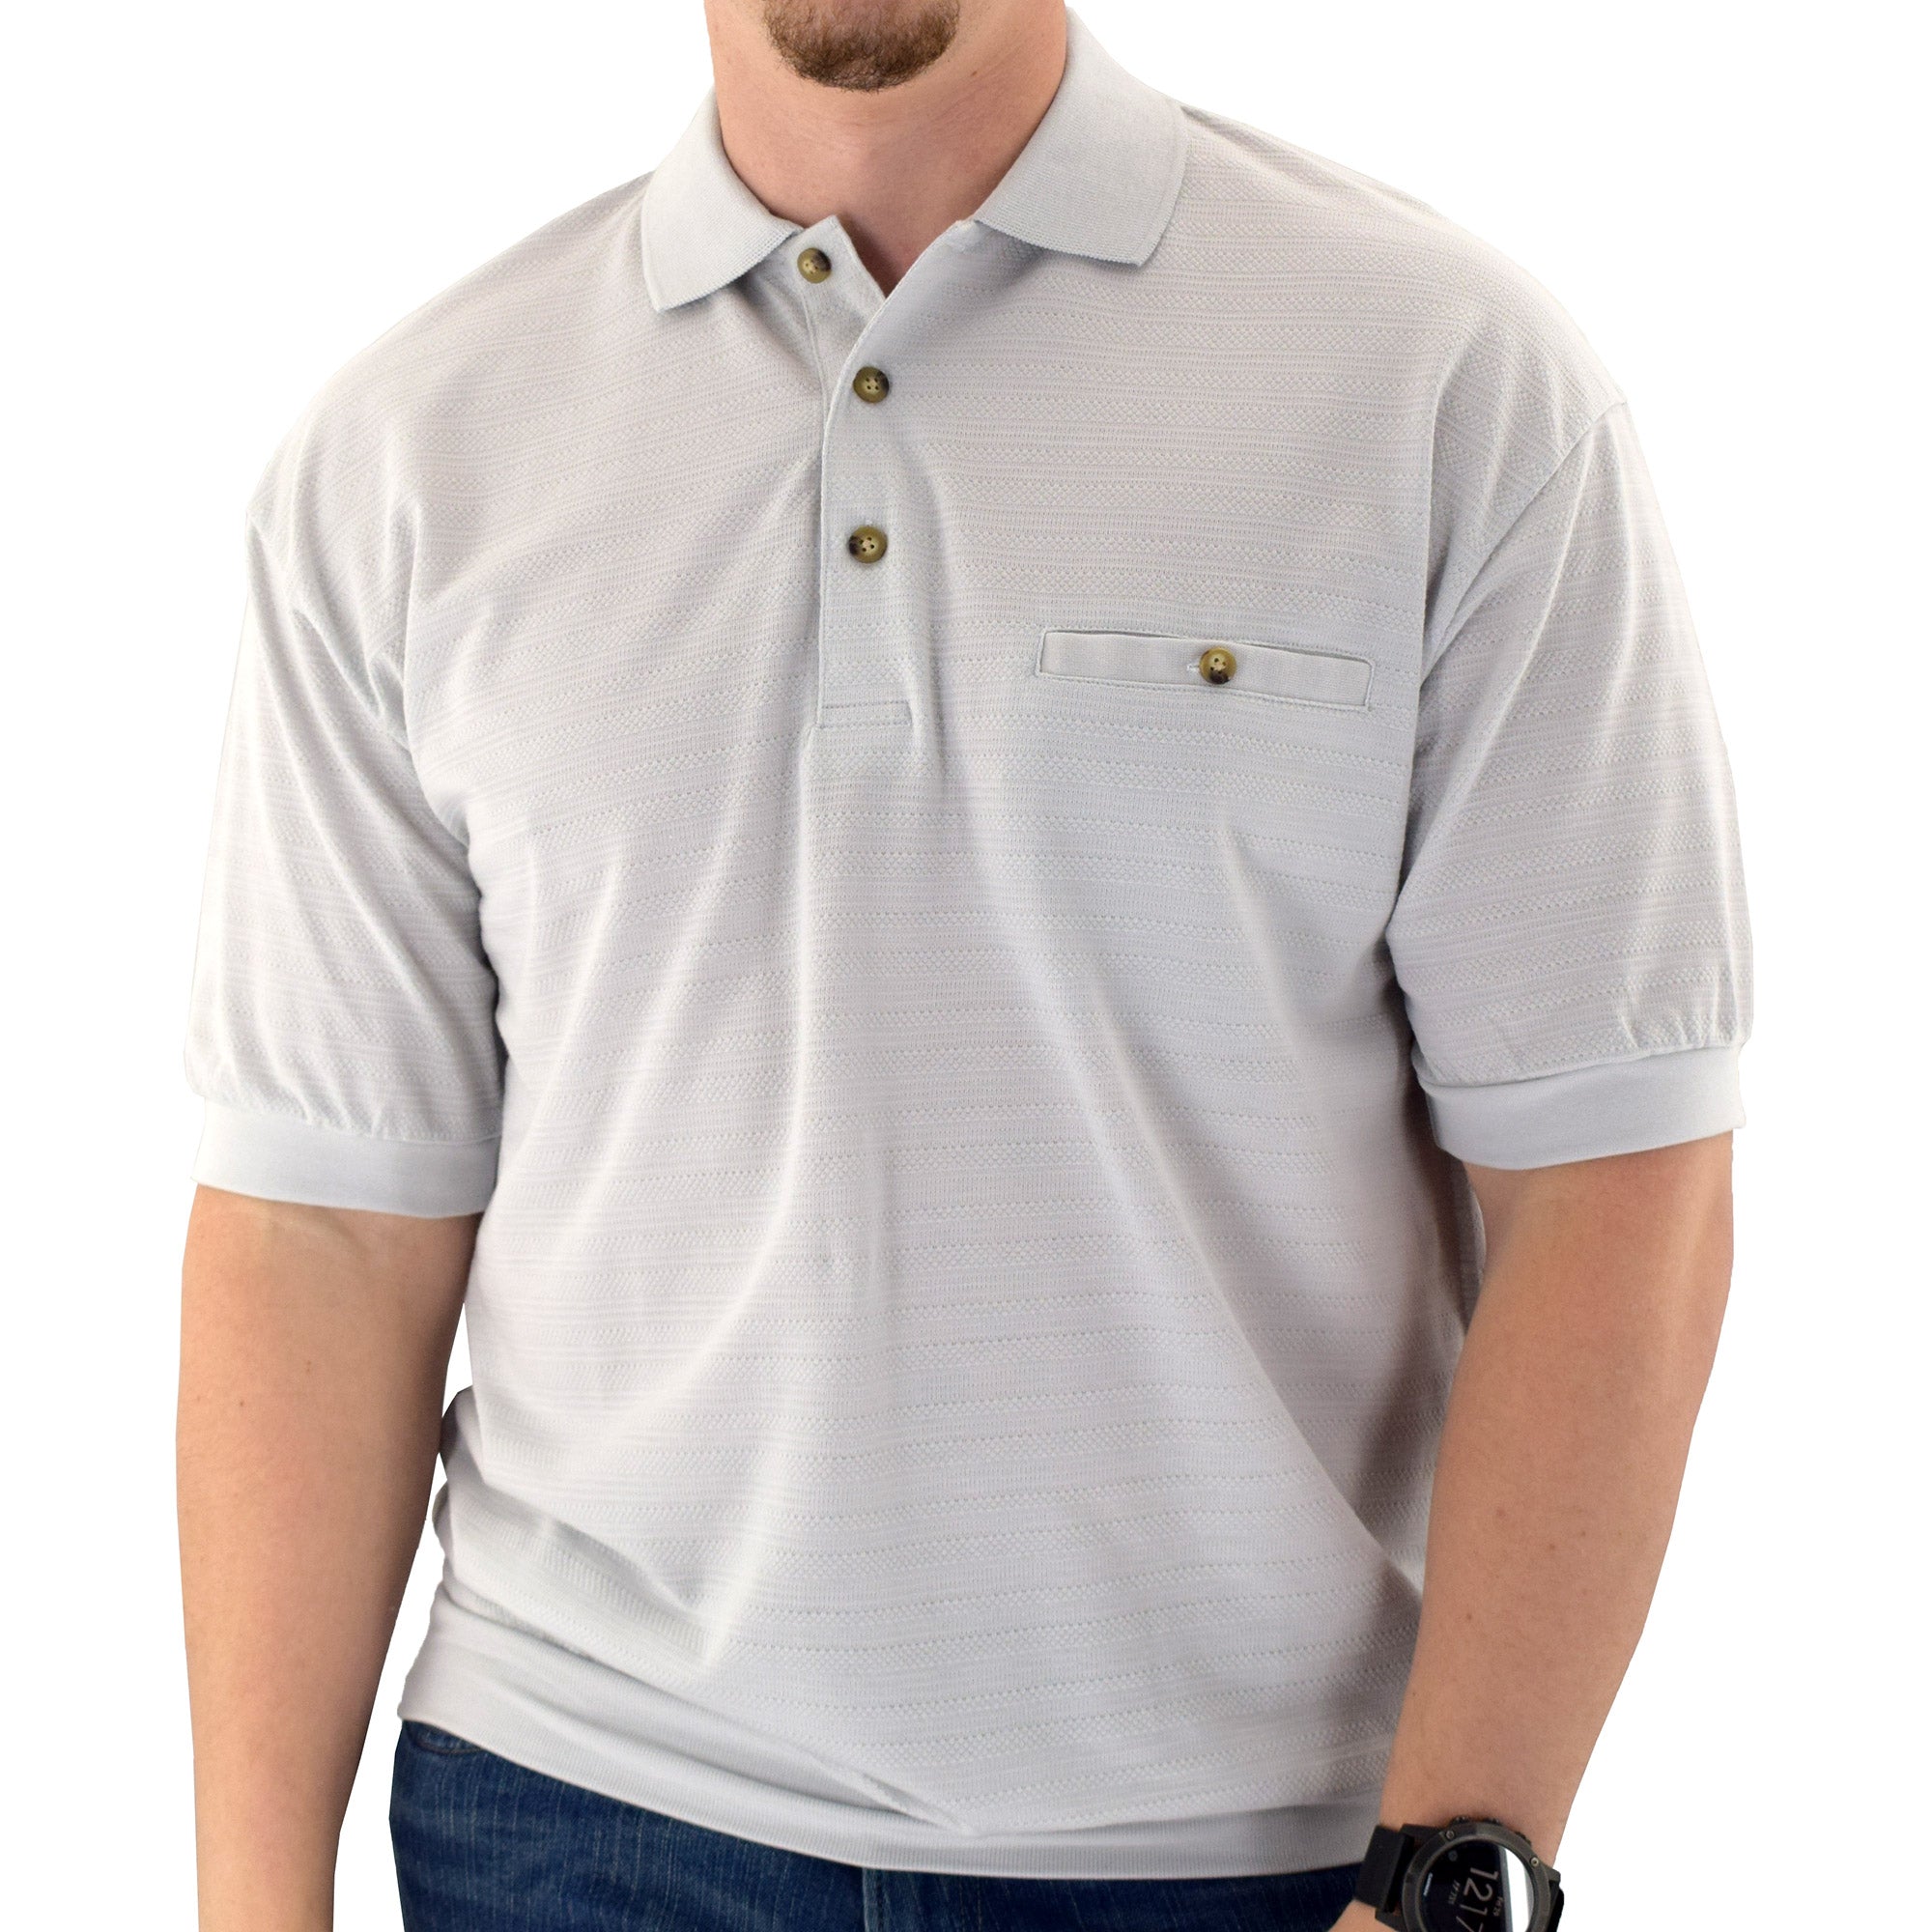 This Safe Harbor Solid Pique Banded Bottom Shirt is made of 60